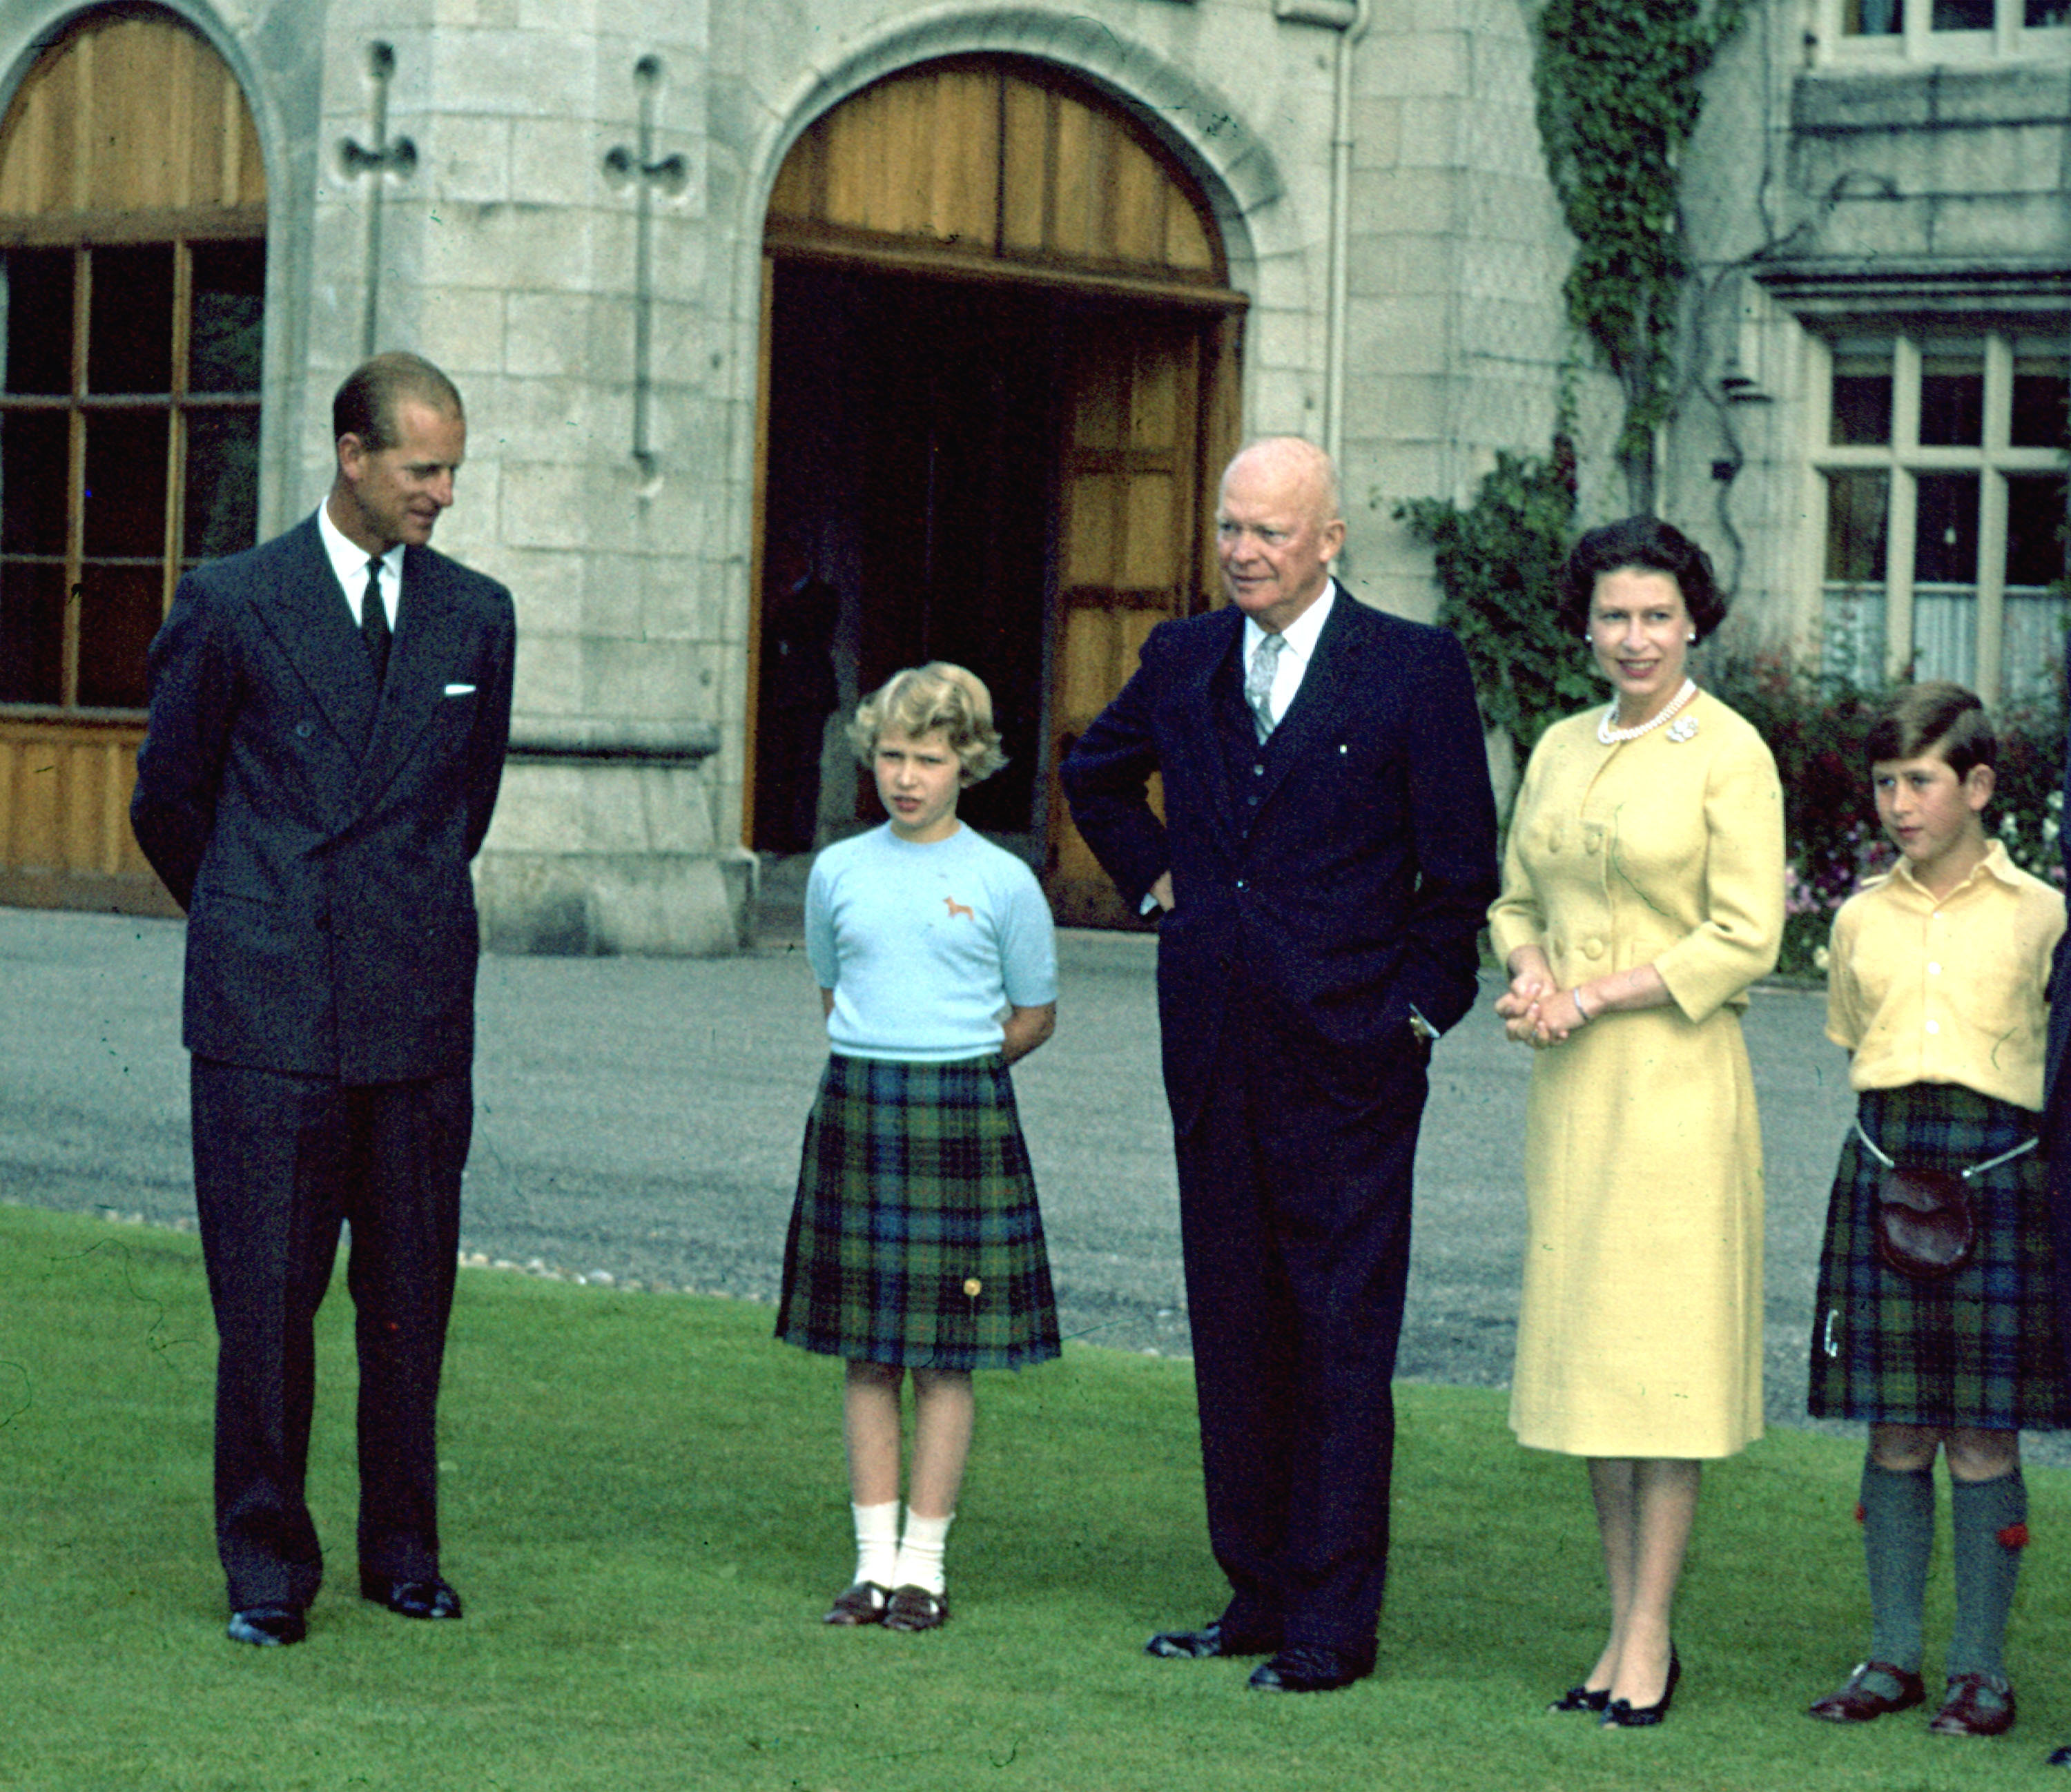 <p>Queen Elizabeth II posed on the grounds of Balmoral Castle in Scotland with President Dwight D. Eisenhower, Prince Philip, Princess Anne and Prince Charles in 1959. Eisenhower was the second of <a href="https://www.wonderwall.com/celebrity/photos/queen-elizabeth-meetings-12-american-presidents-photos-3015347.gallery">12 American presidents</a> the monarch has met and spent time with during her life.</p>